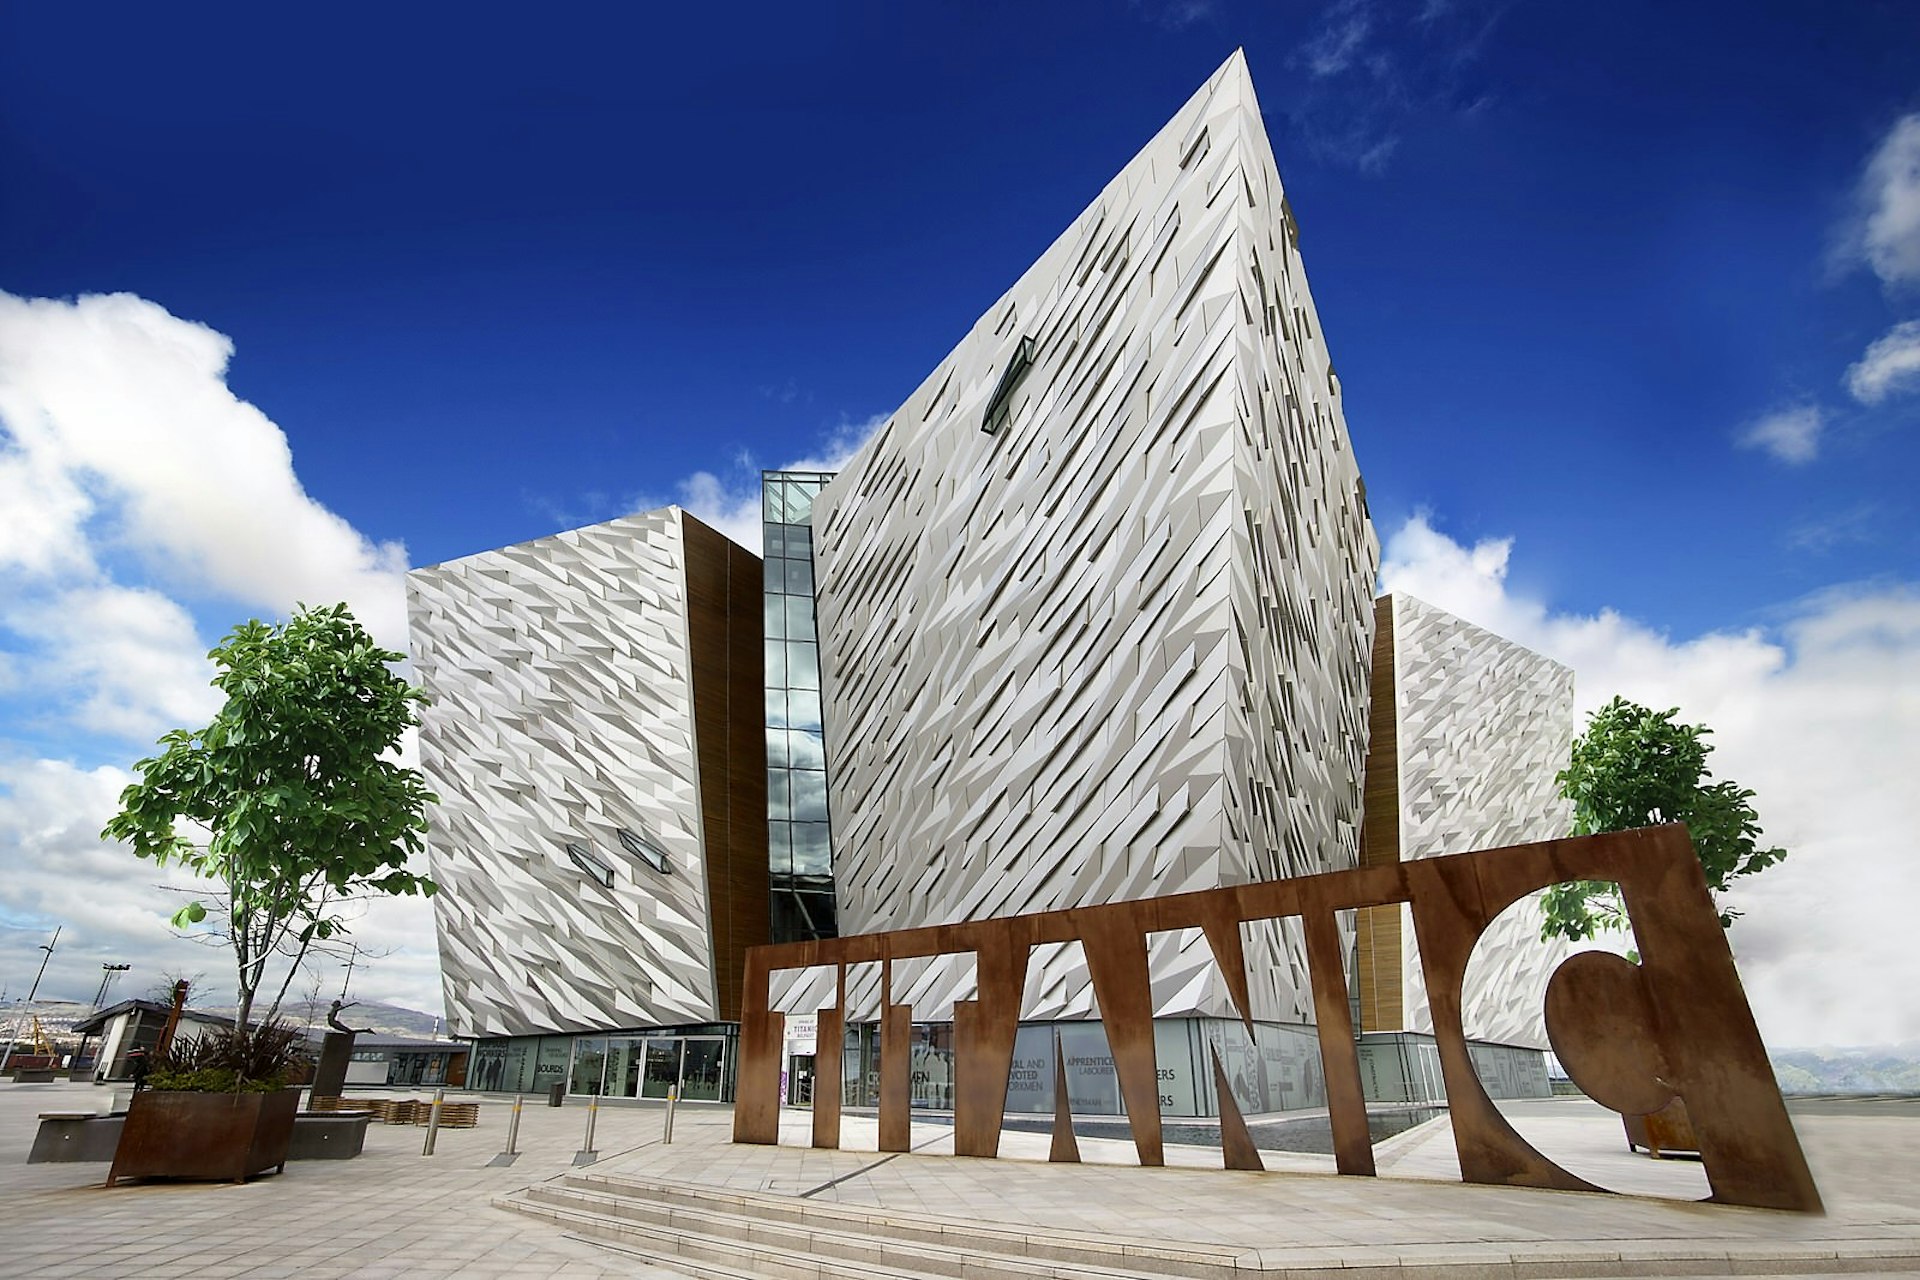 The informative and moving Titanic Belfast museum explores the history of the famous ship and the city in which it was built © Atmosphere1 / Shutterstock